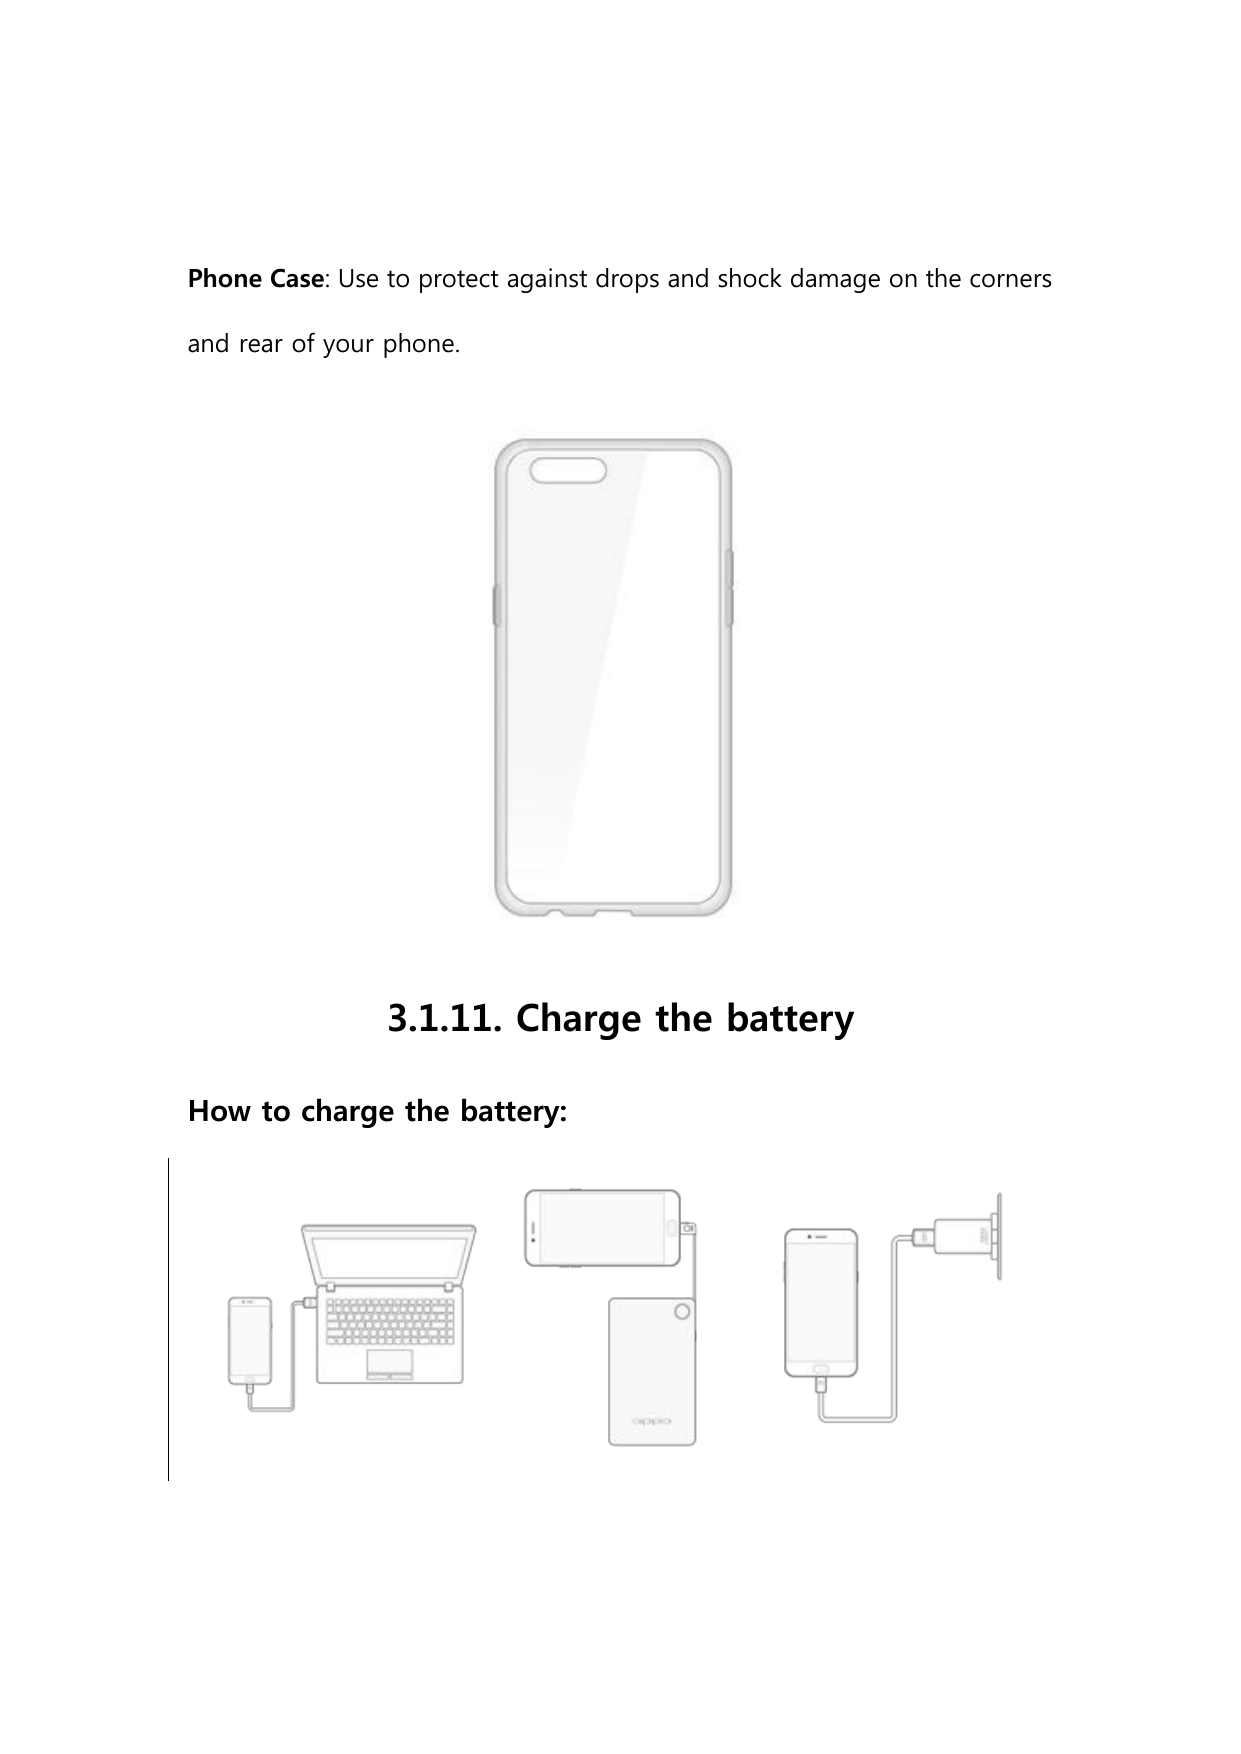 Phone Case: Use to protect against drops and shock damage on the cornersand rear of your phone.3.1.11. Charge the batteryHow to 